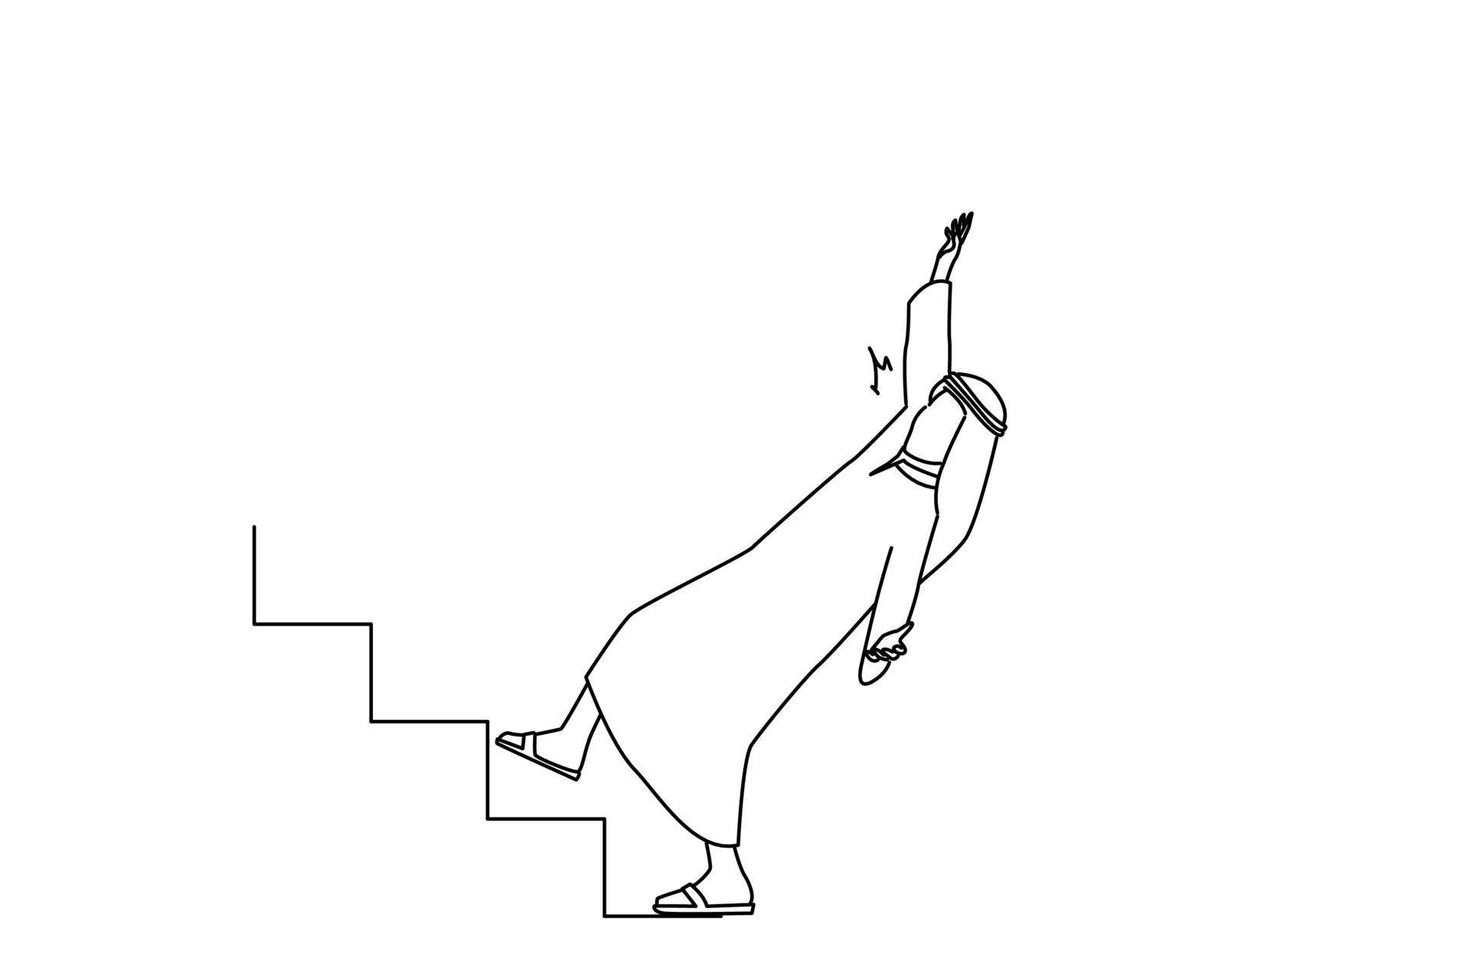 Cartoon of stressed saudi businessman manager falling down from ladder stairs feeling panic. Business crisis and failure metaphor. Outline drawing style art vector